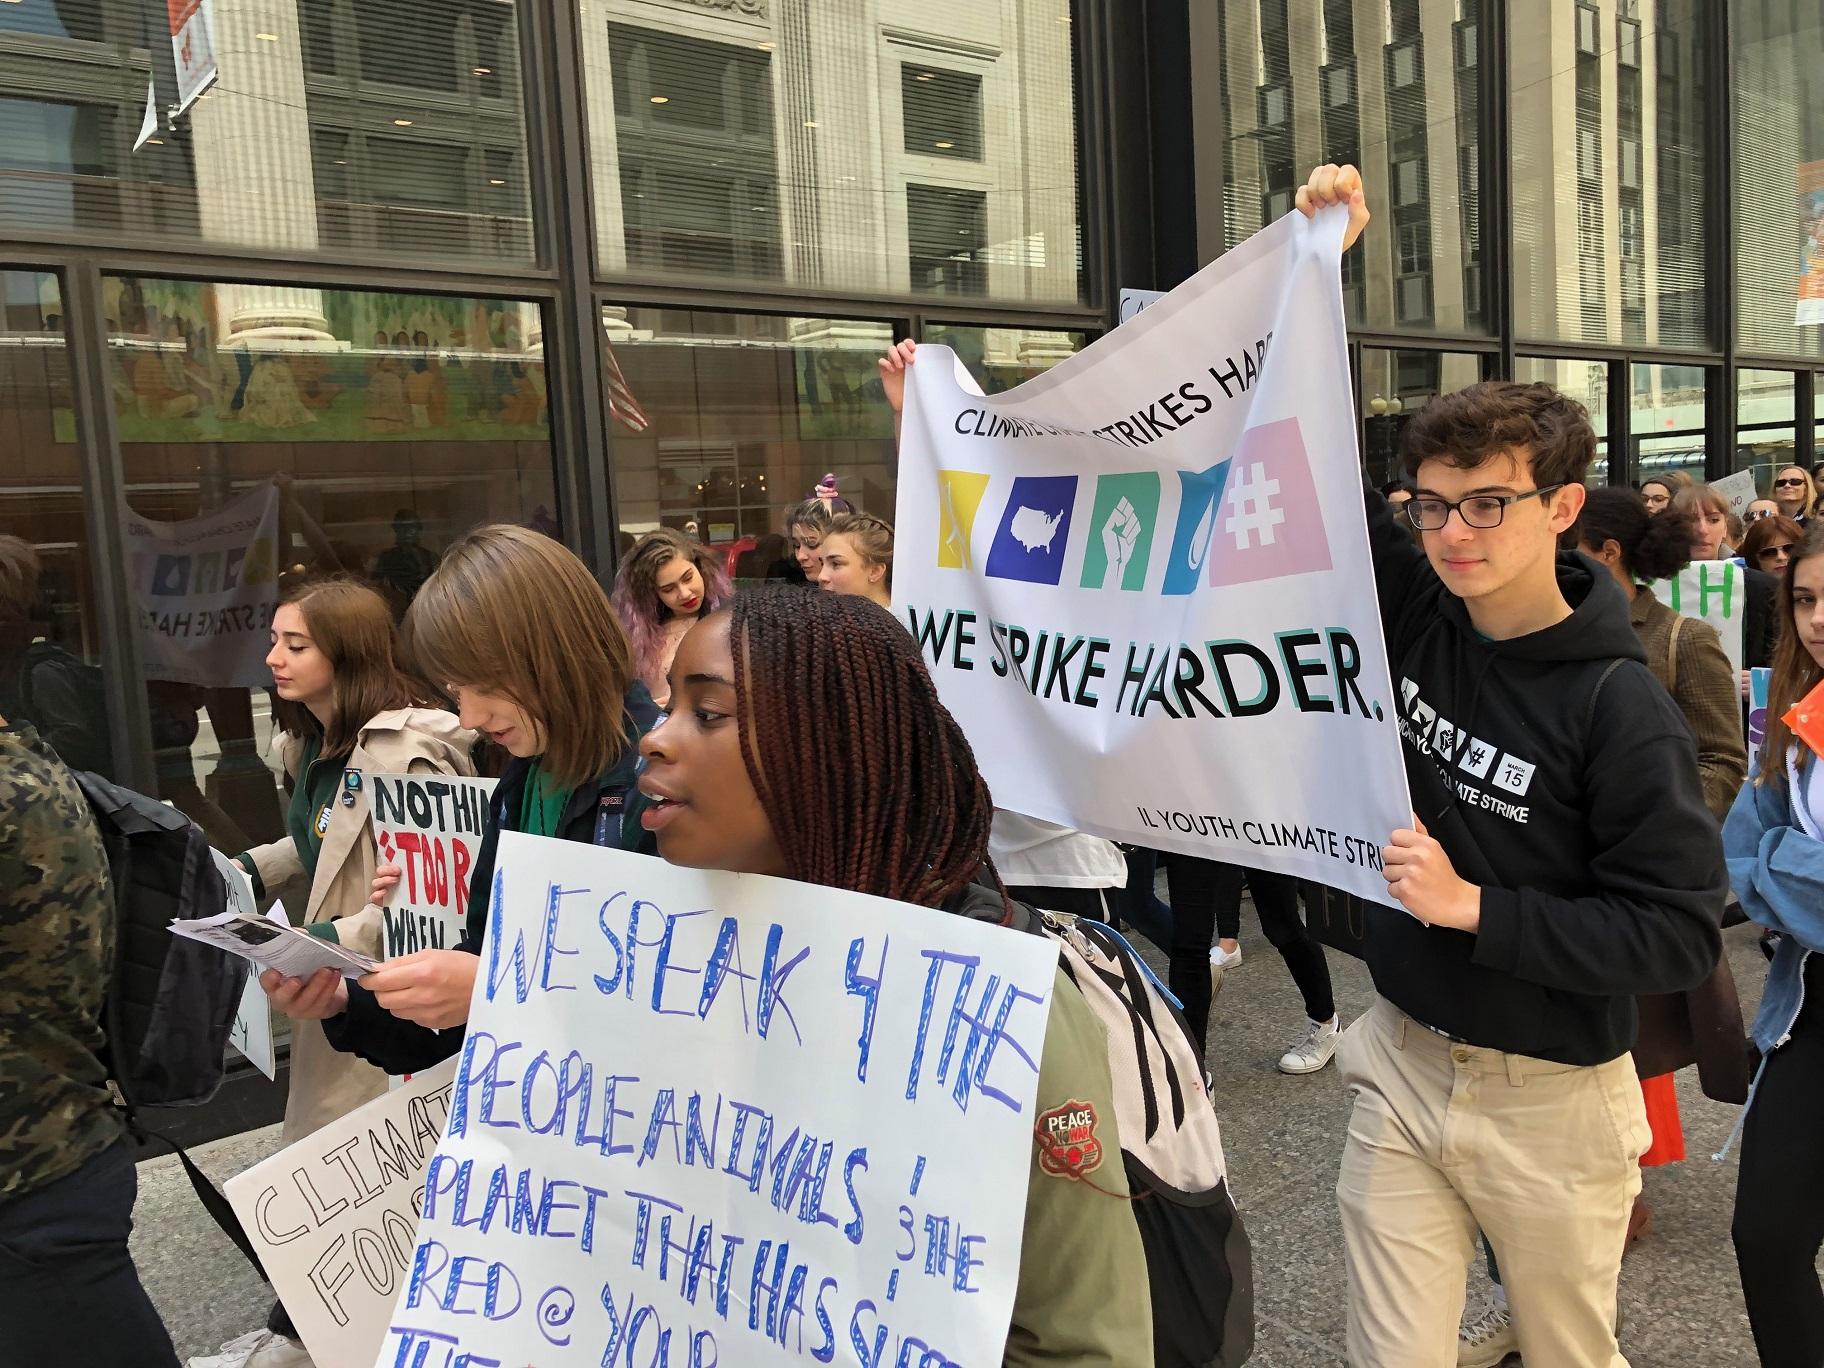  Students from across the Chicago area rallied in support of action to combat climate change in downtown Chicago on Friday, May 3 2019. (Alex Ruppenthal / WTTW News)